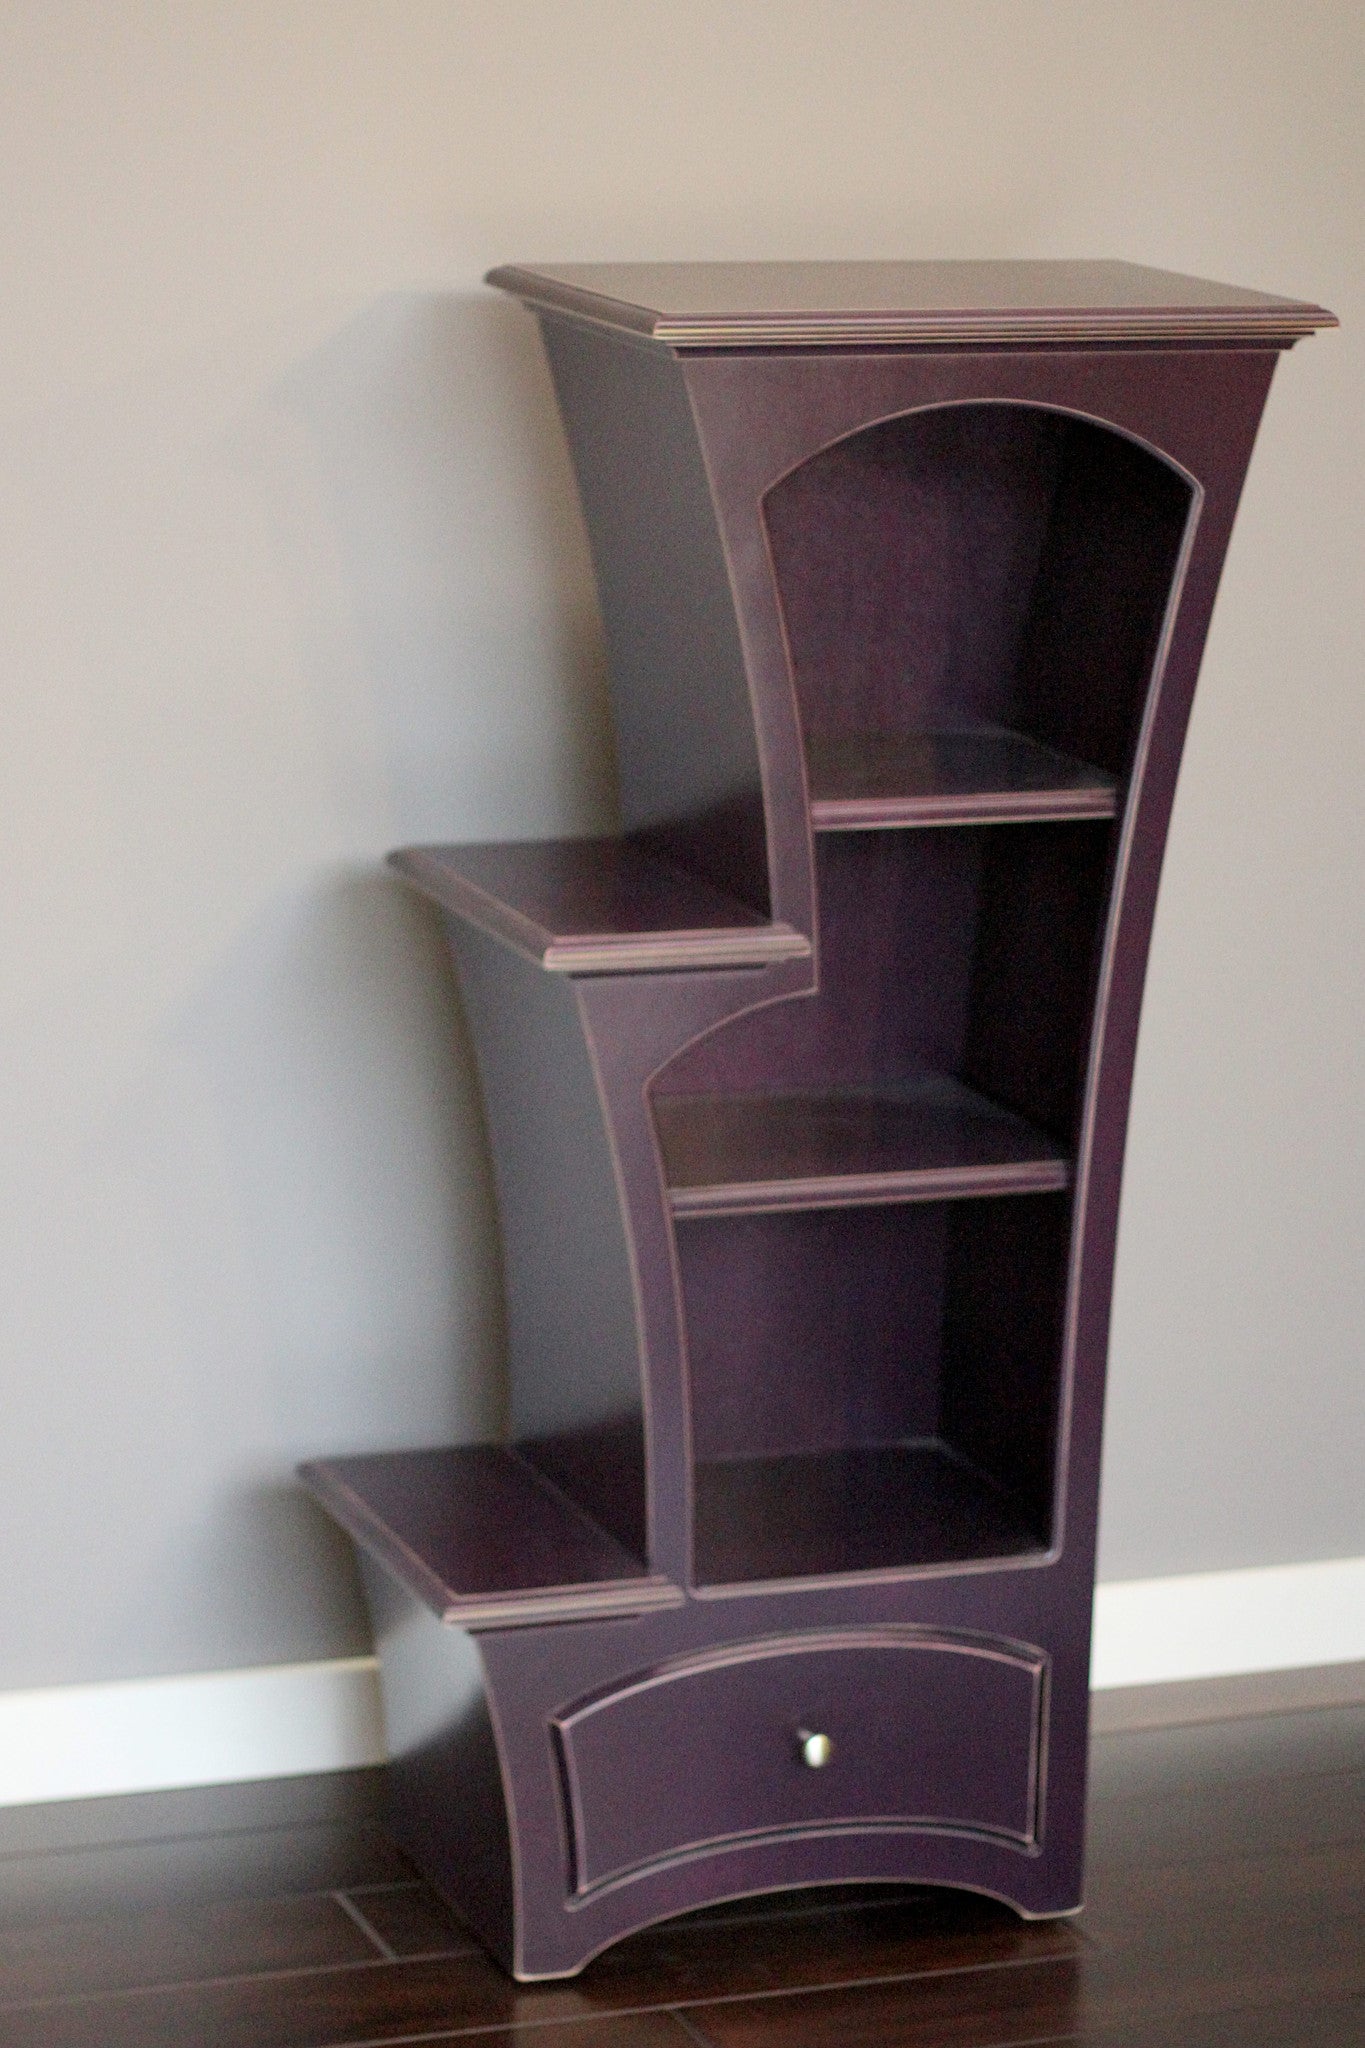 Stepped display bookcase in dark violet paint